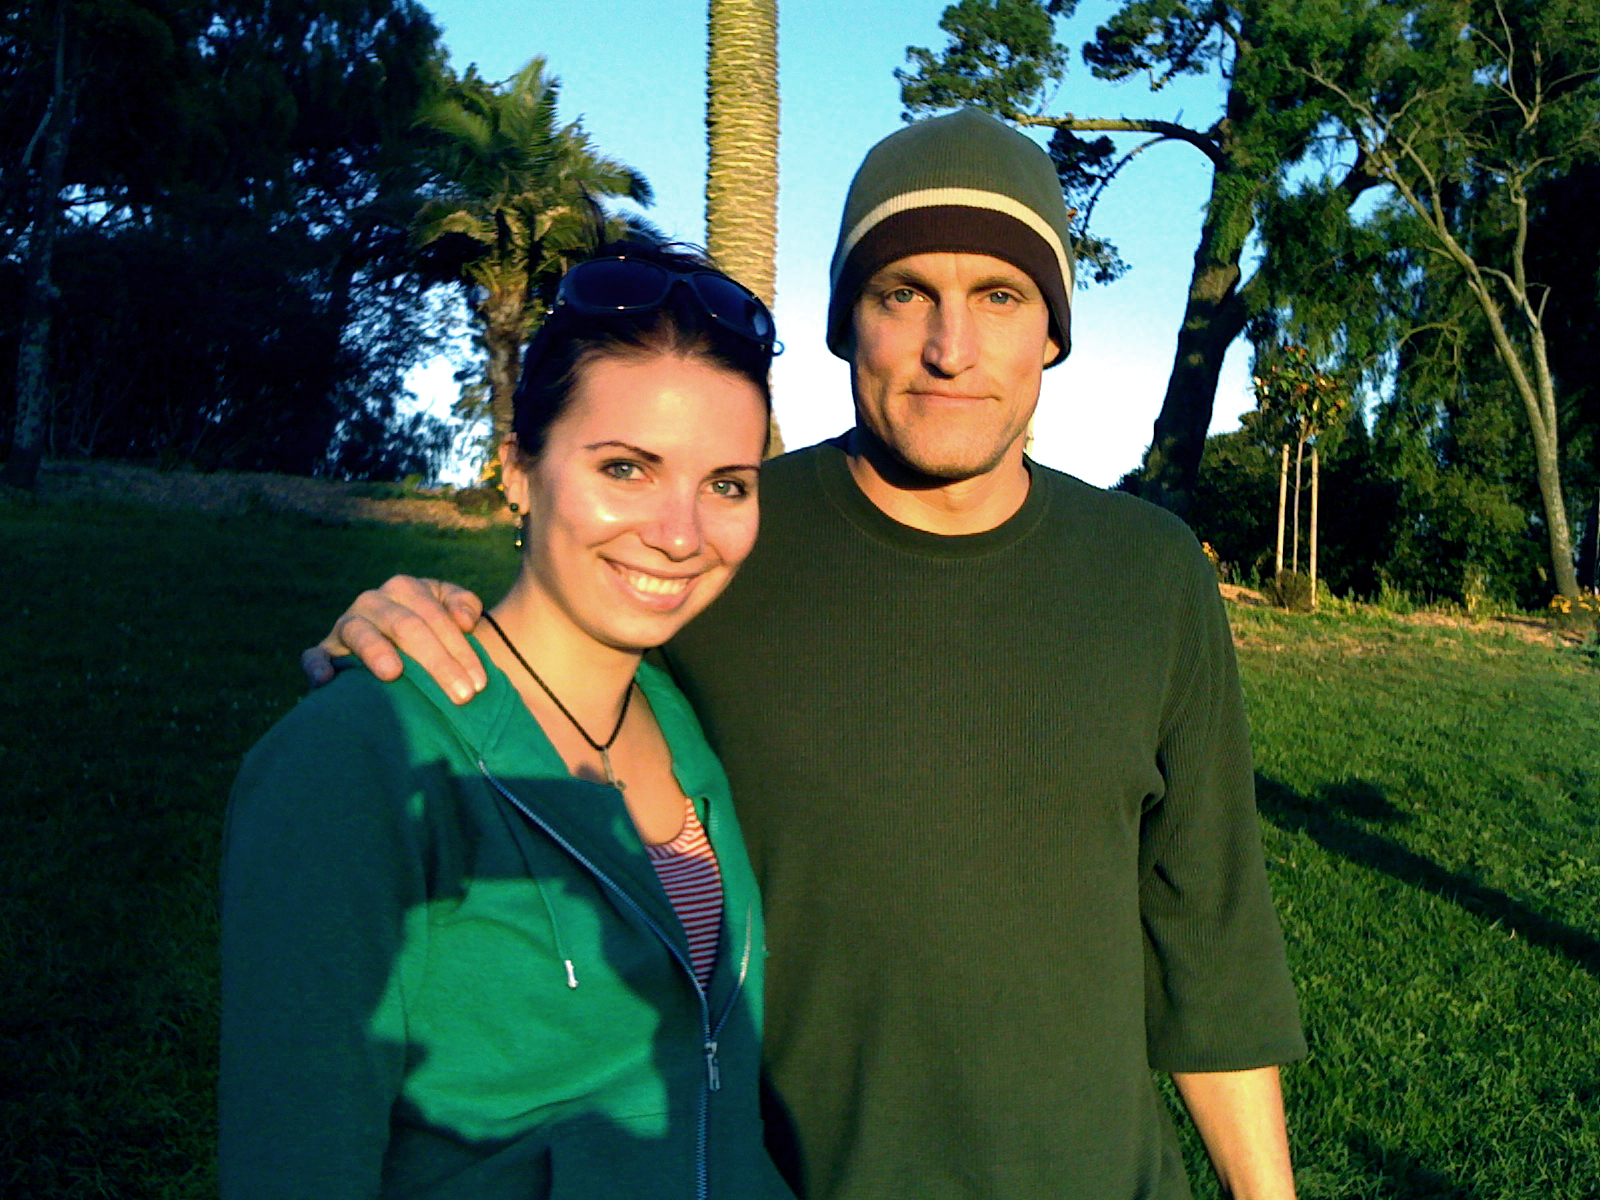 Sky Tallone with Woody Harrelson, randomly met him at a park in San Francisco in 2009 when he was in town promoting 